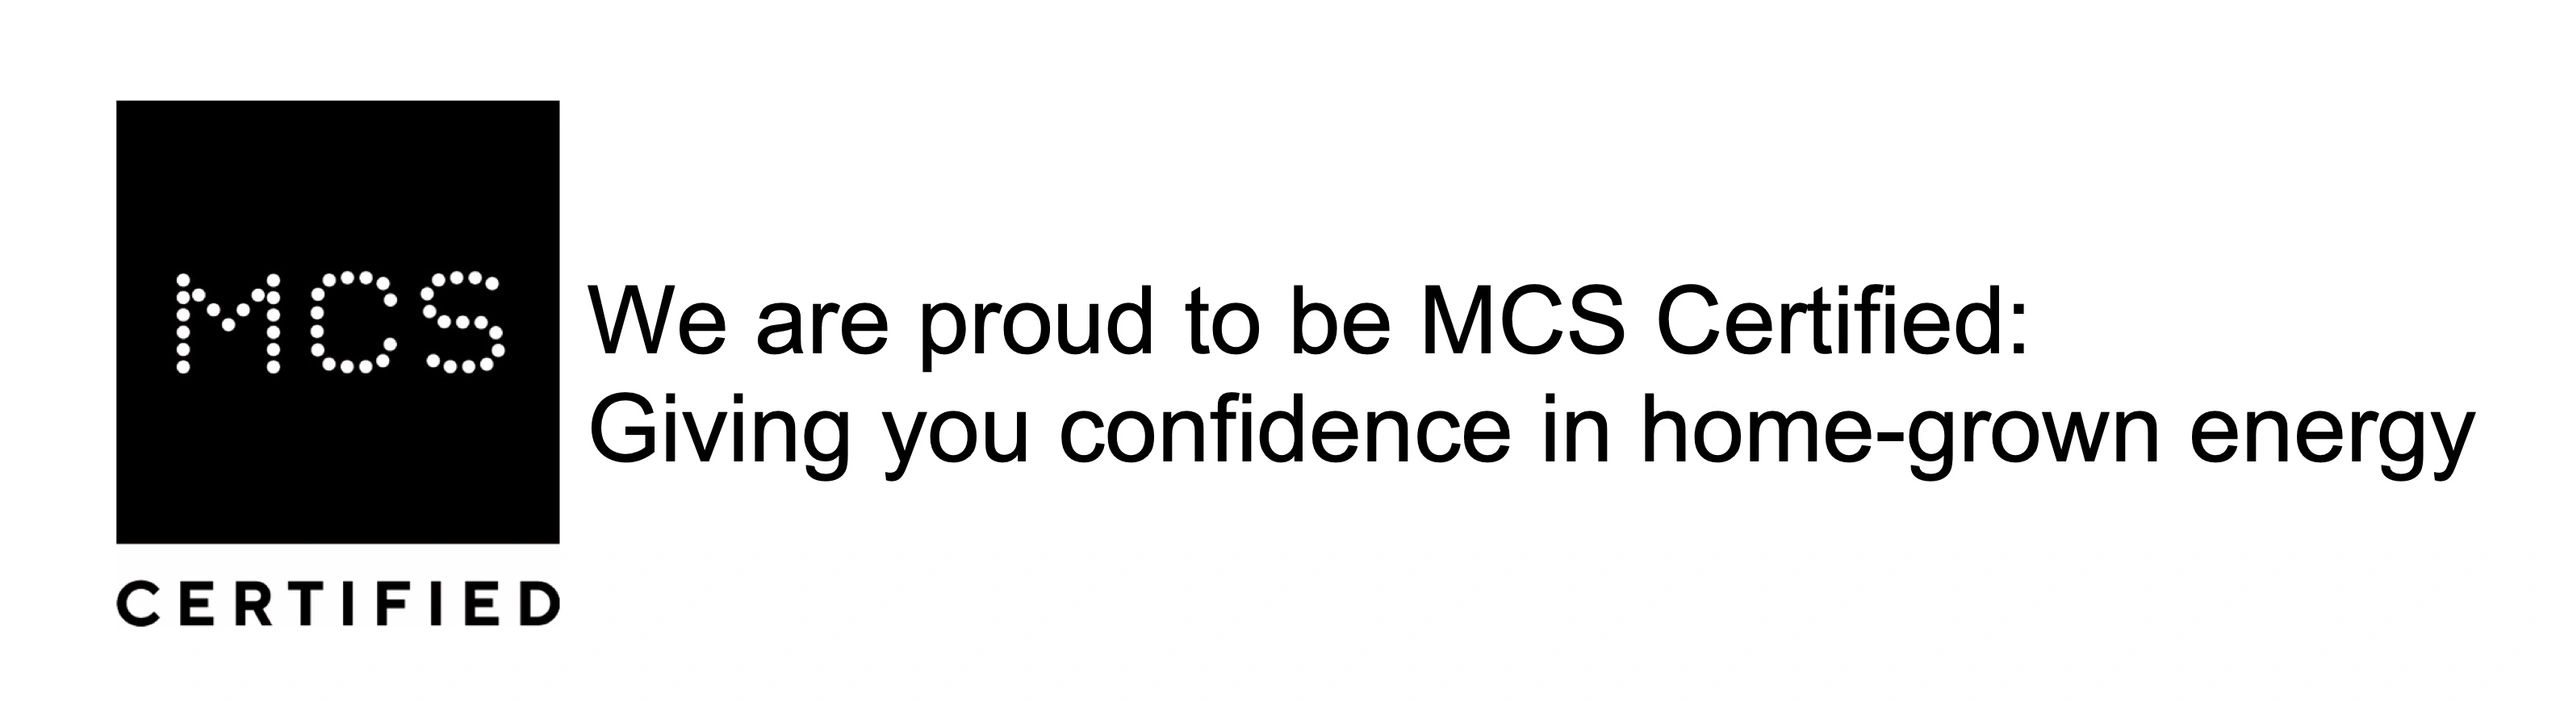 We are Proud to be MCS Certified